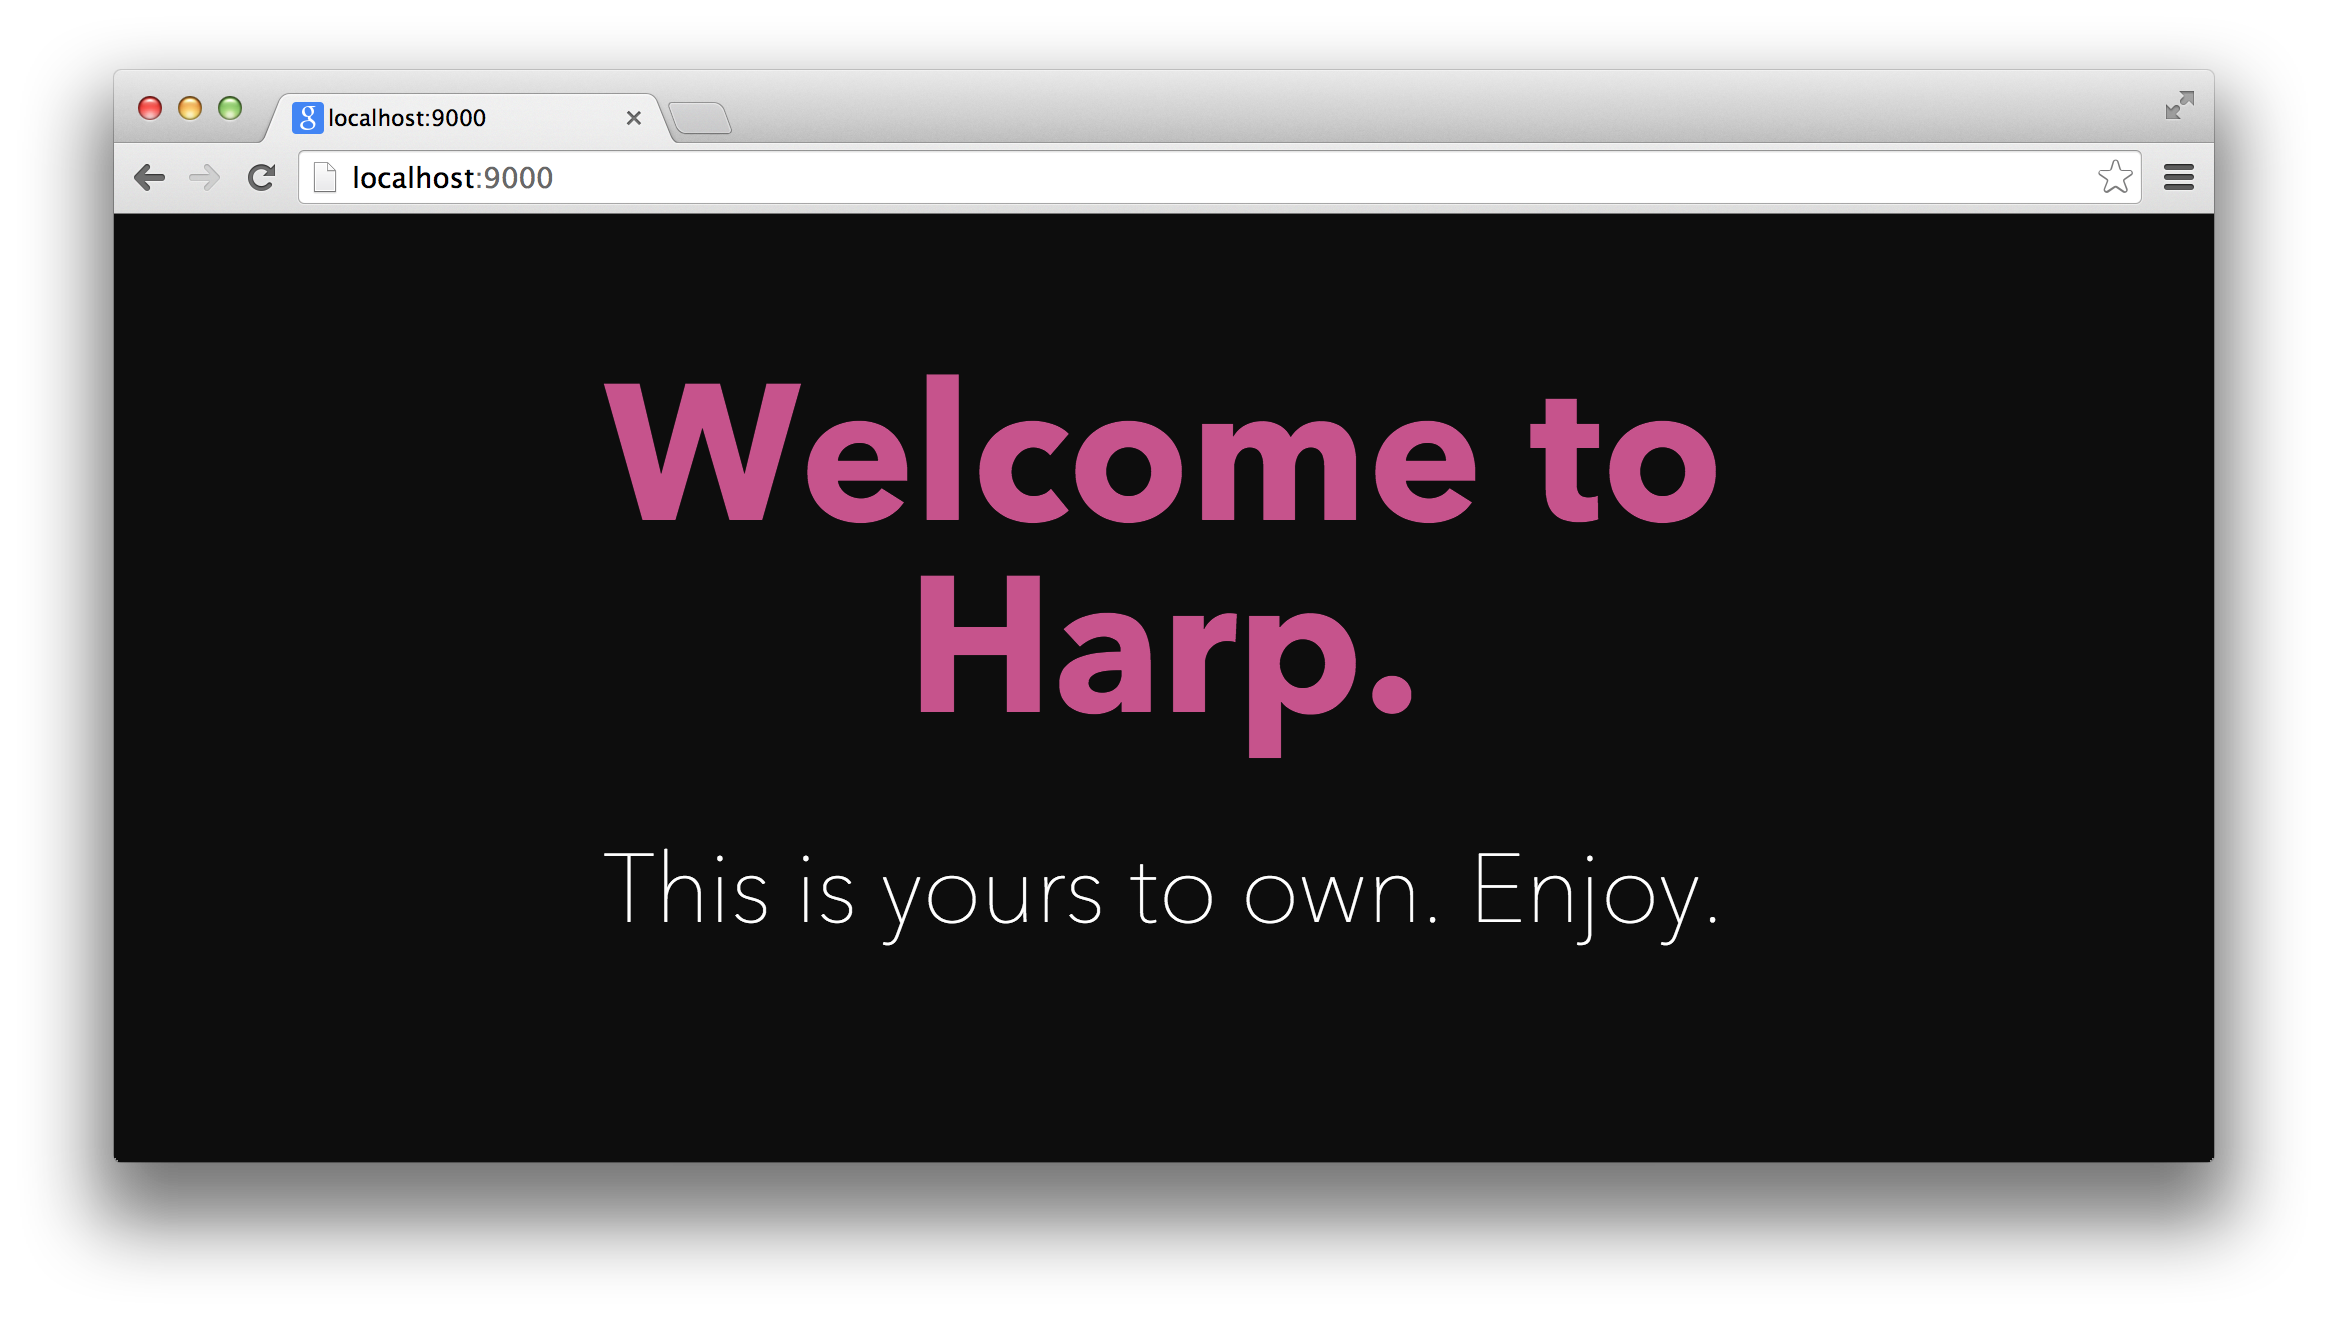 Build a Harp application with Sass